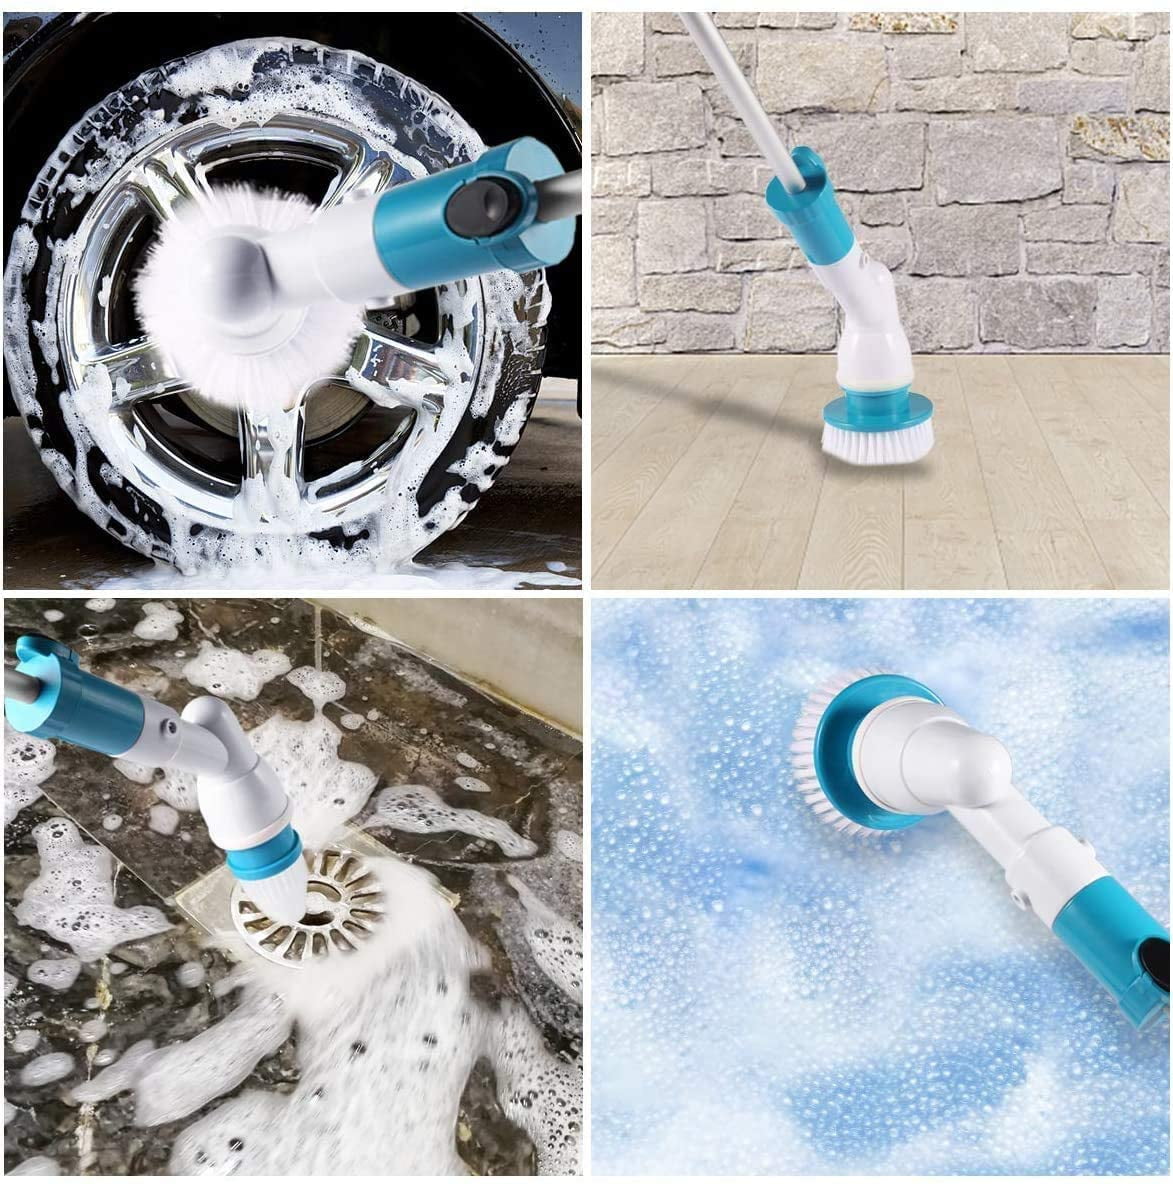 Dropship VEWIOR Electric Spin Scrubber, Cordless Cleaning Brush